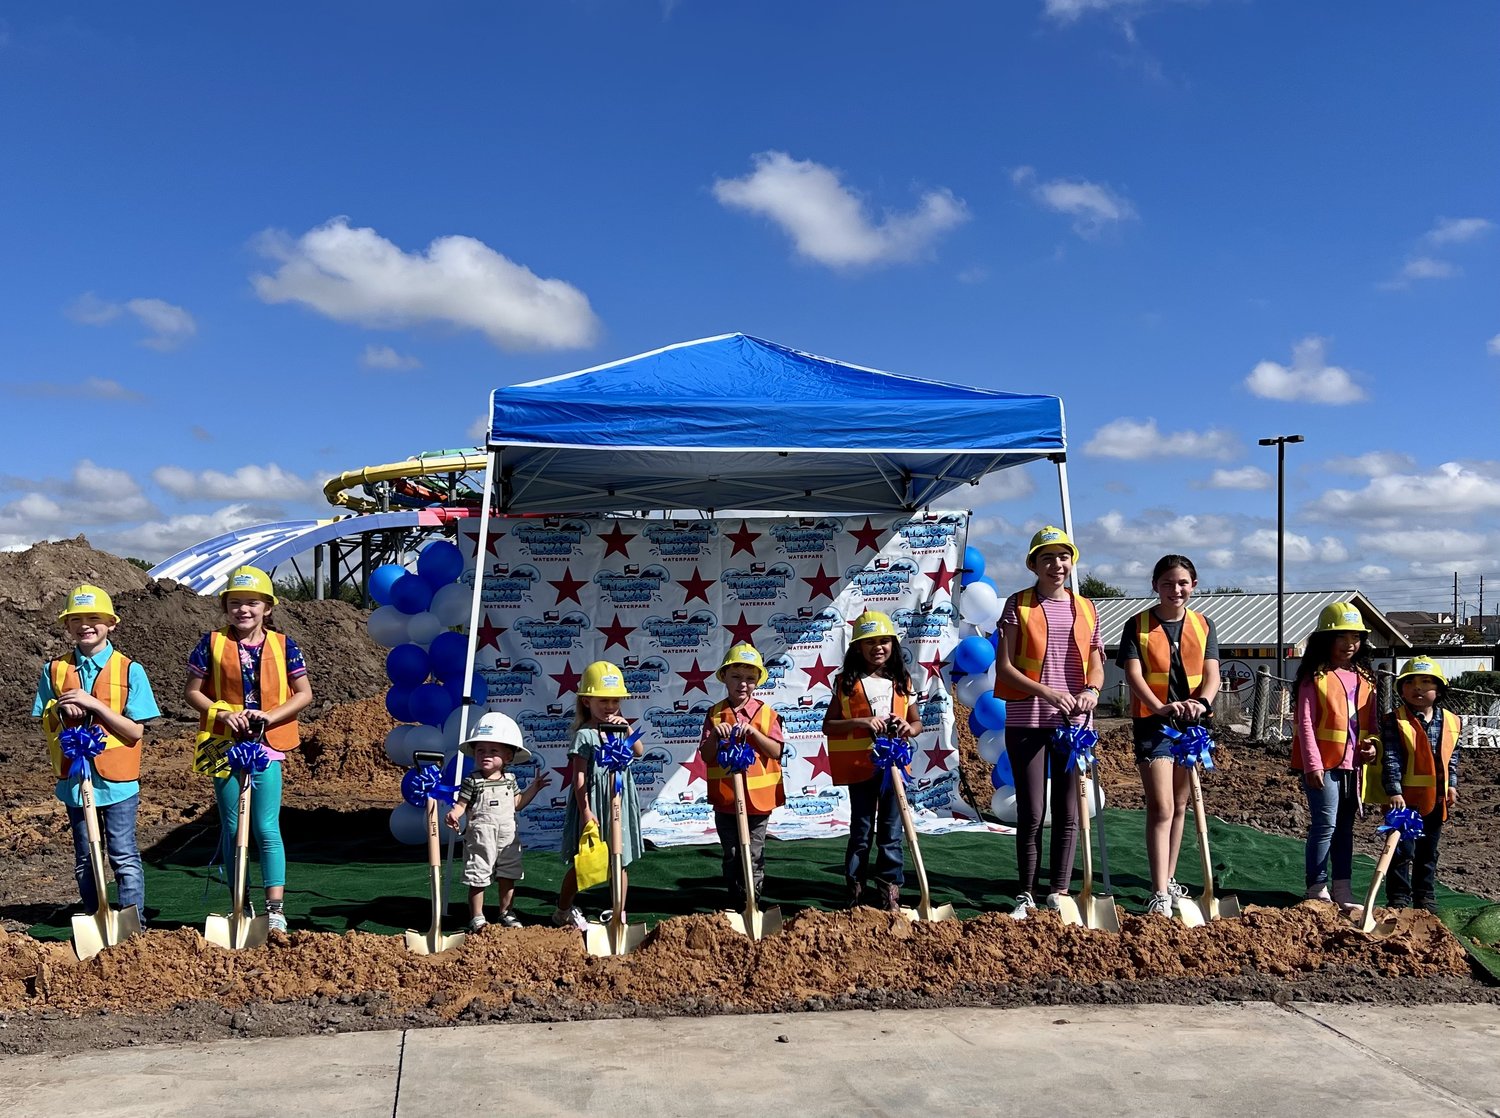 These youngsters participate in the ceremonial groundbreaking for Typhoon Texas Junior, an interactive water experience designed for children. The groundbreaking took place Nov. 7.